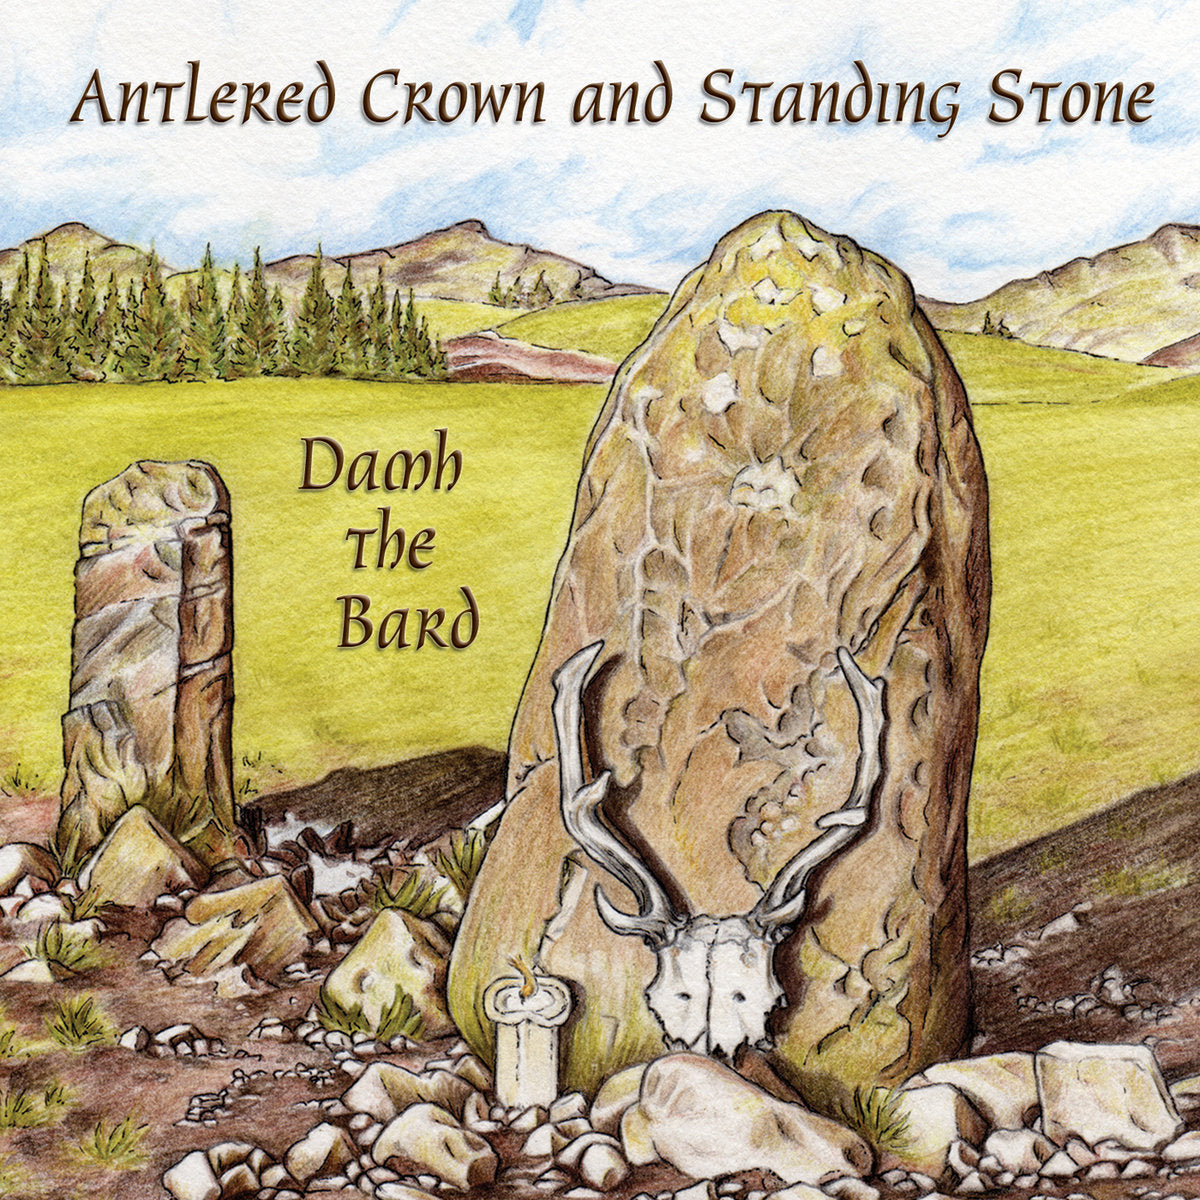 Antlered Crown and Standing Stone